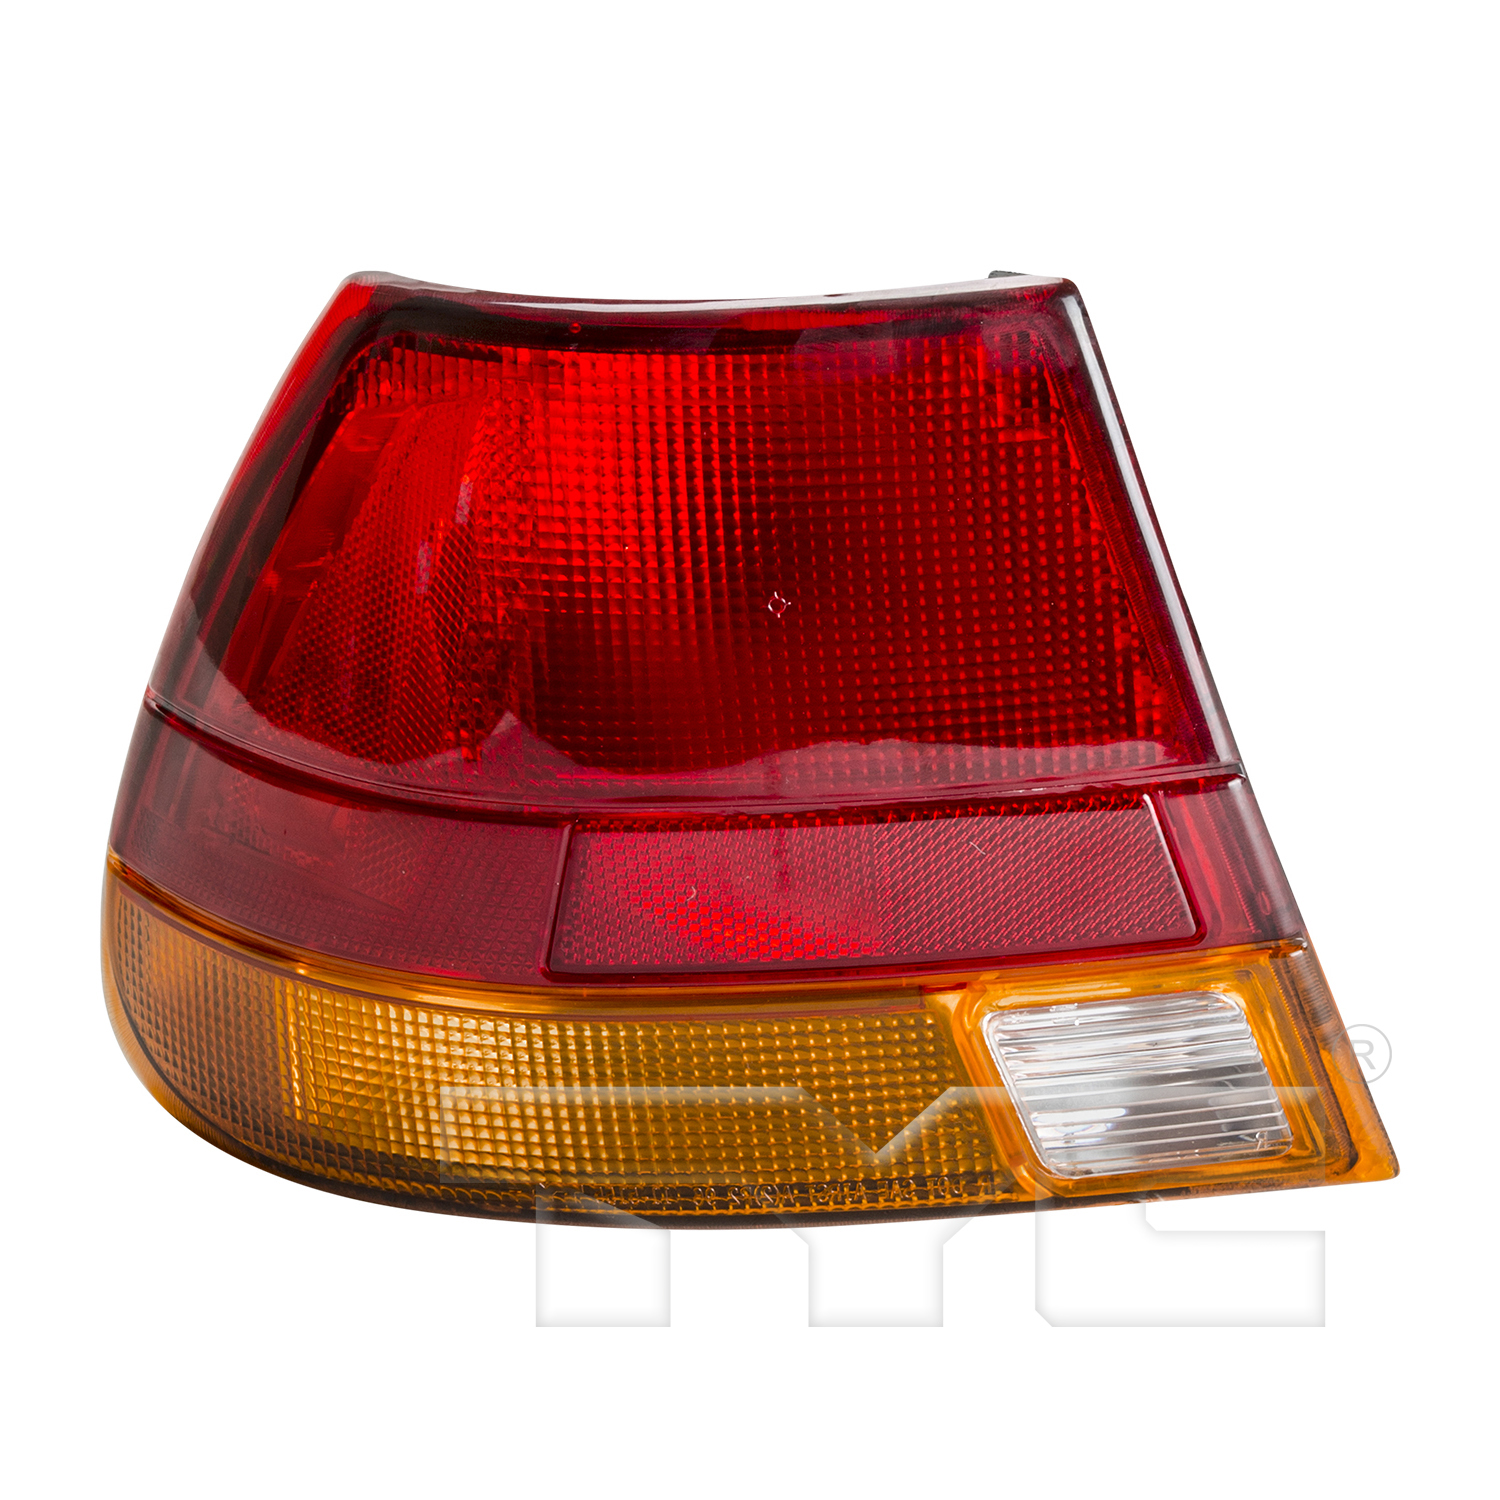 Aftermarket TAILLIGHTS for SATURN - SL, SL,96-97,LT Taillamp lens/housing